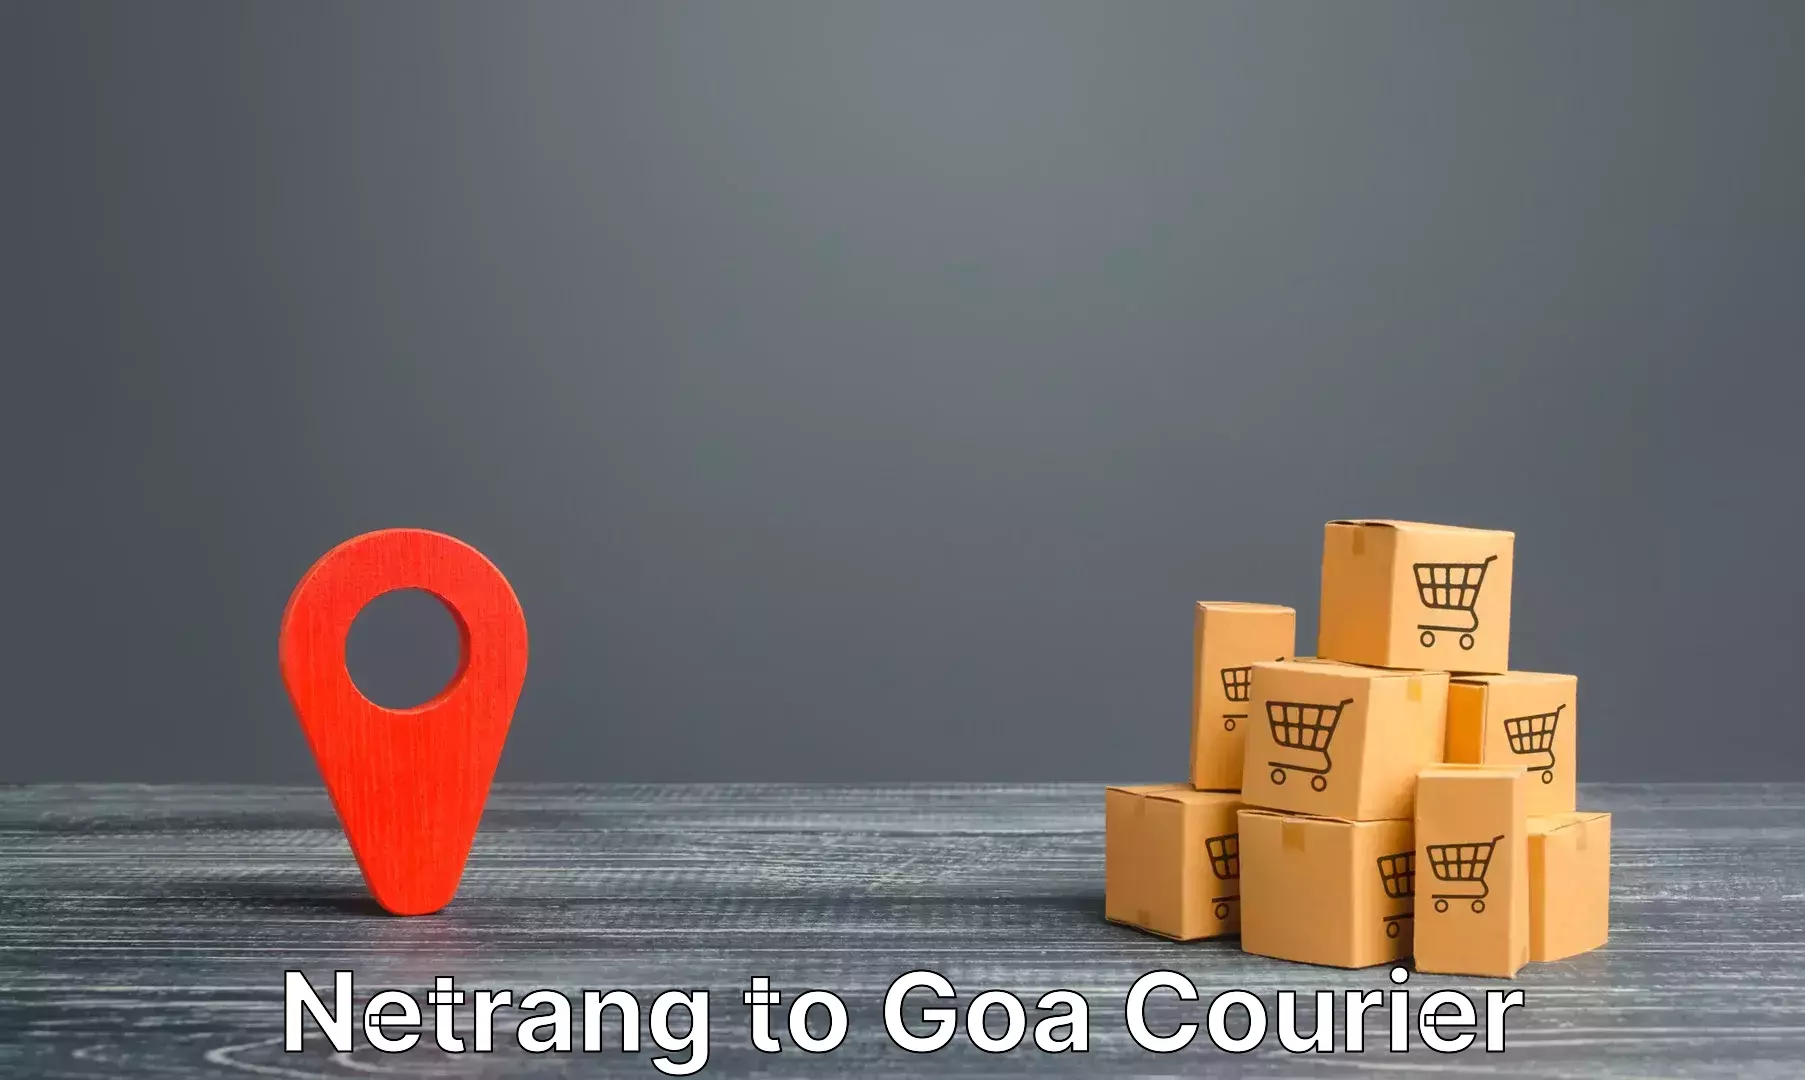 Luggage transport consultancy Netrang to South Goa